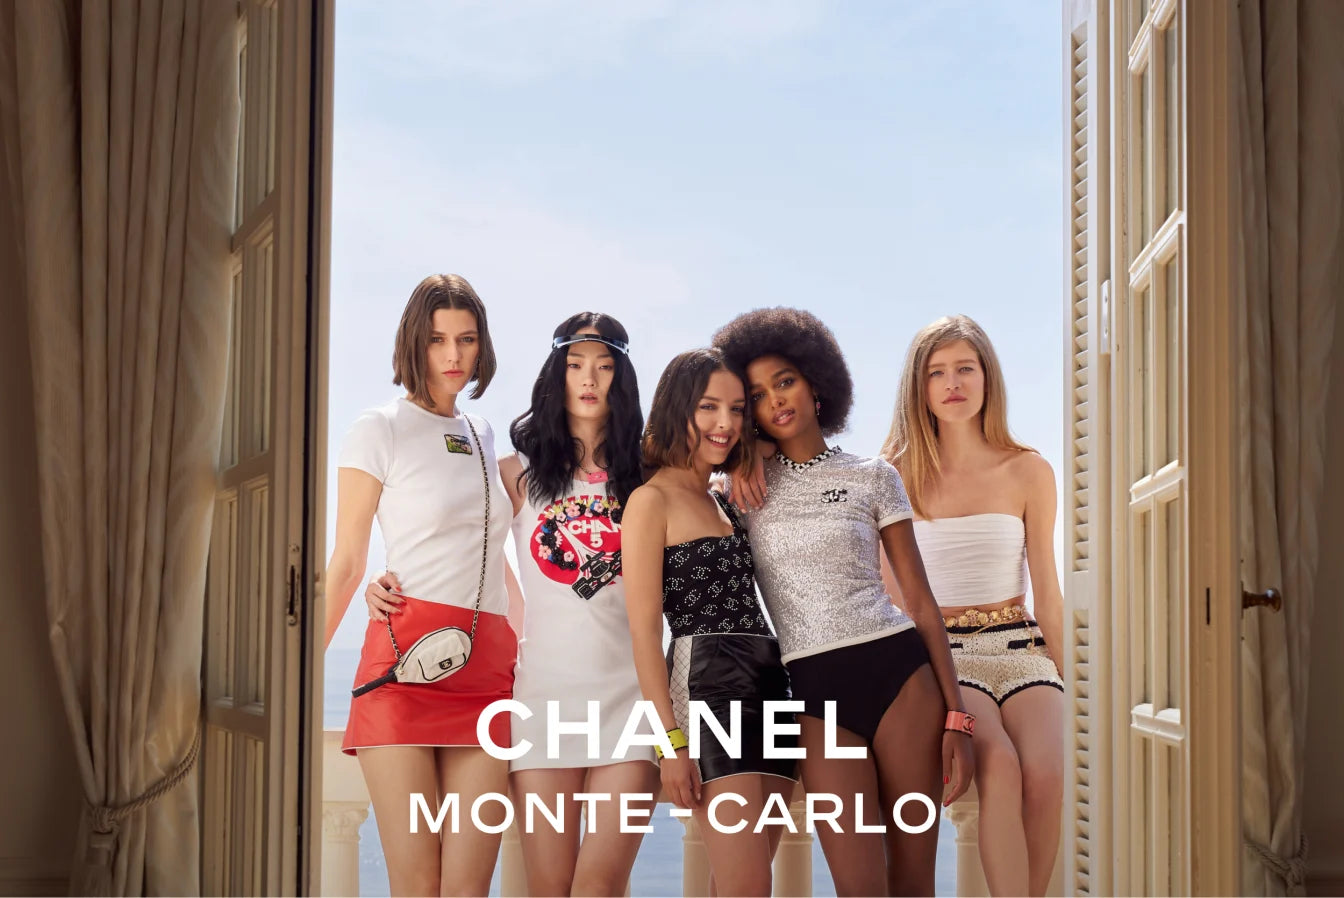 Chanel Monte-Carlo Cruise 2022/23 collection by Virginie Viard